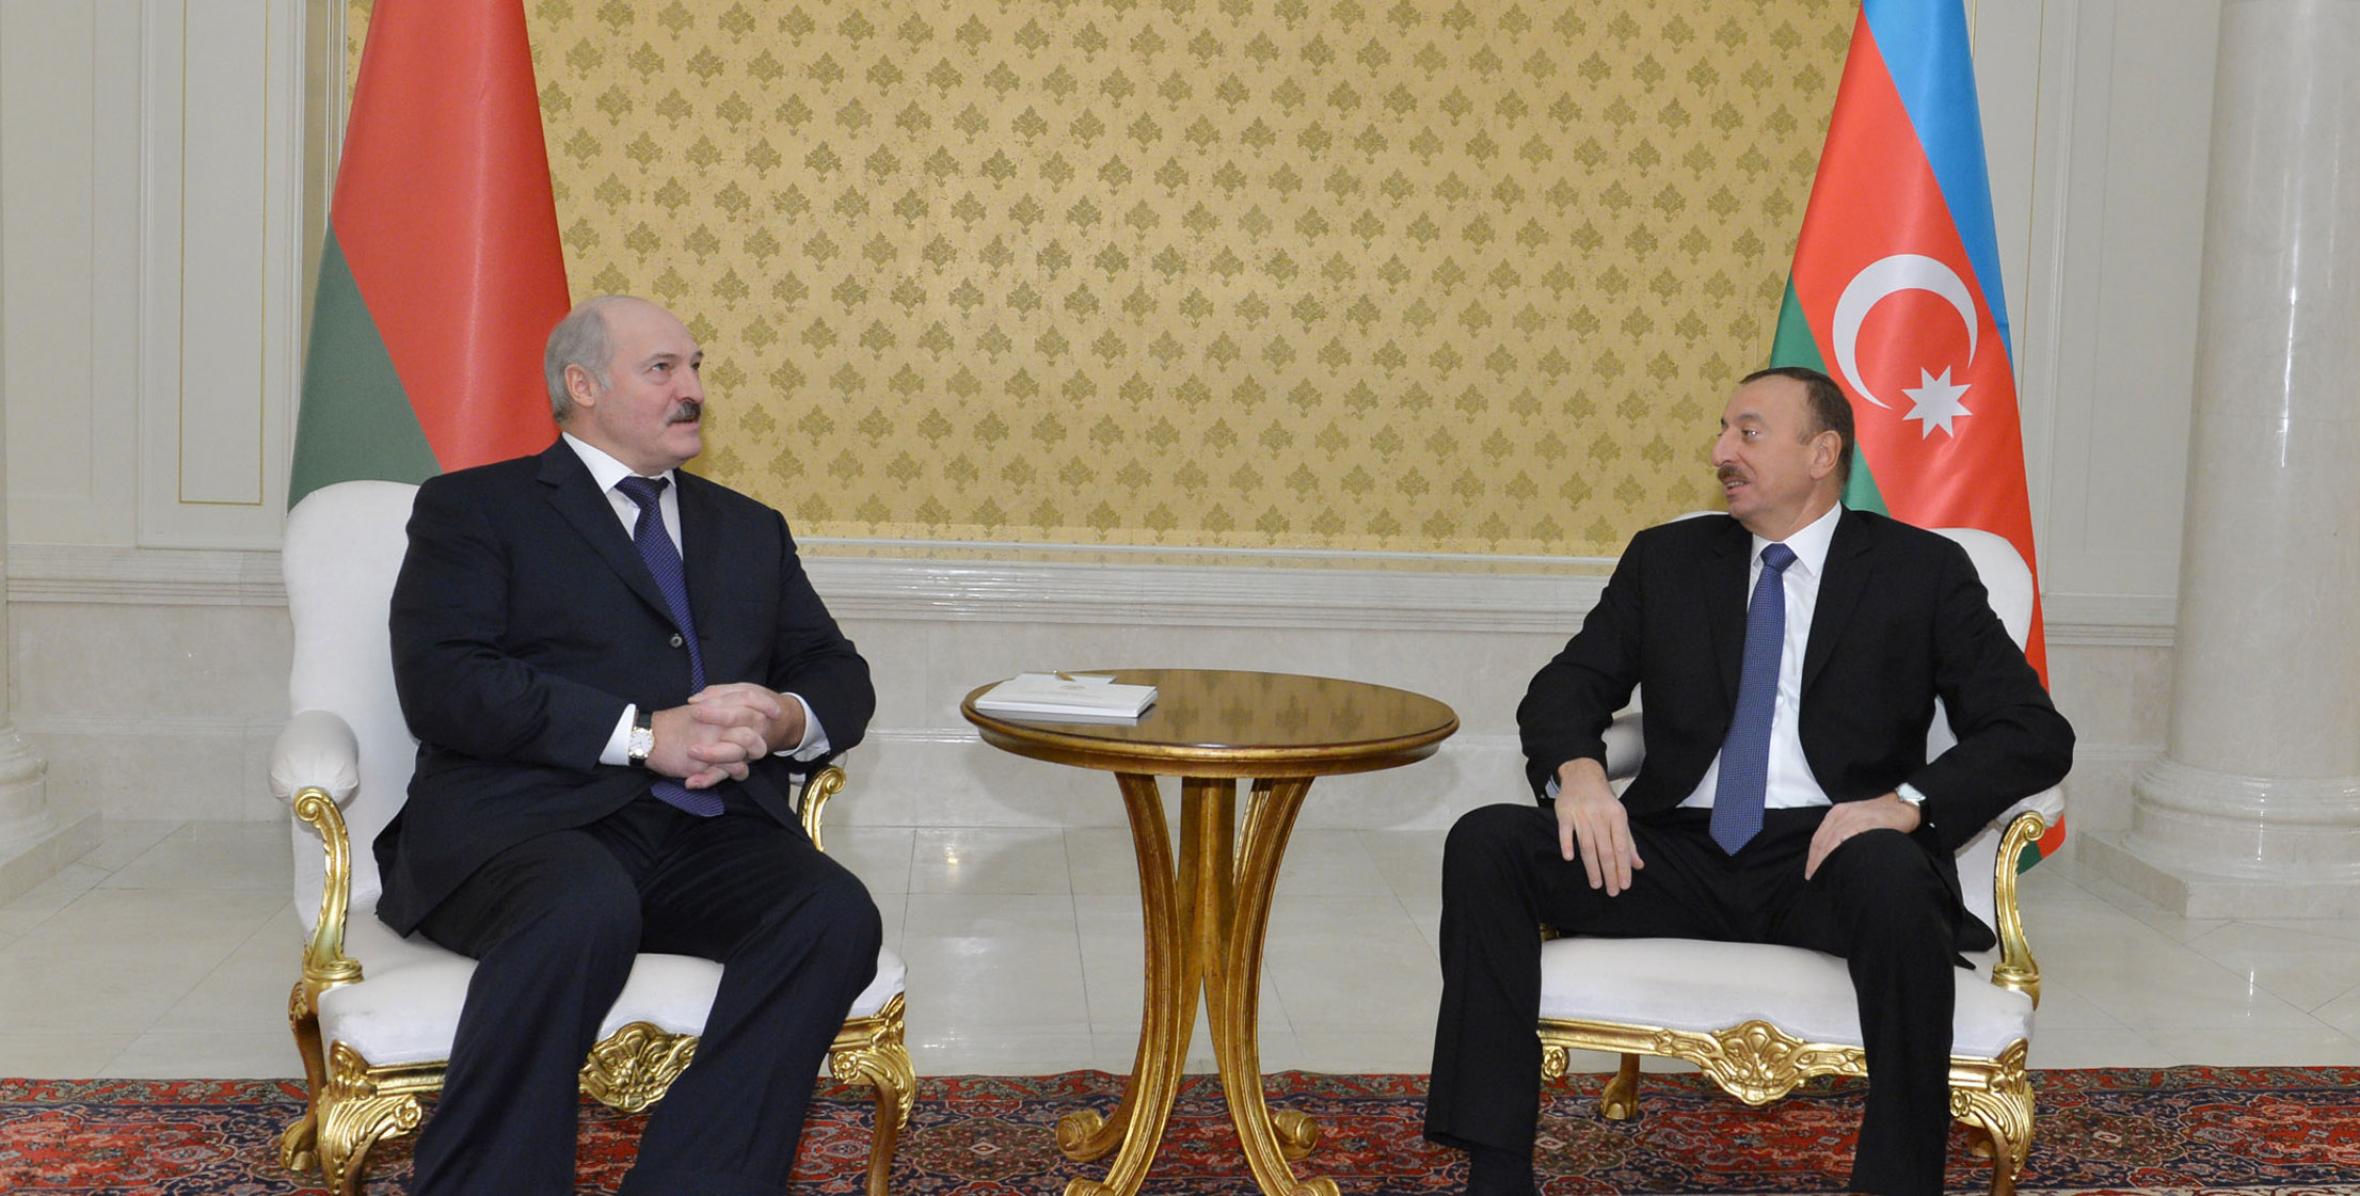 Ilham Aliyev and Belarusian President Lukashenko had a one-on-one meeting